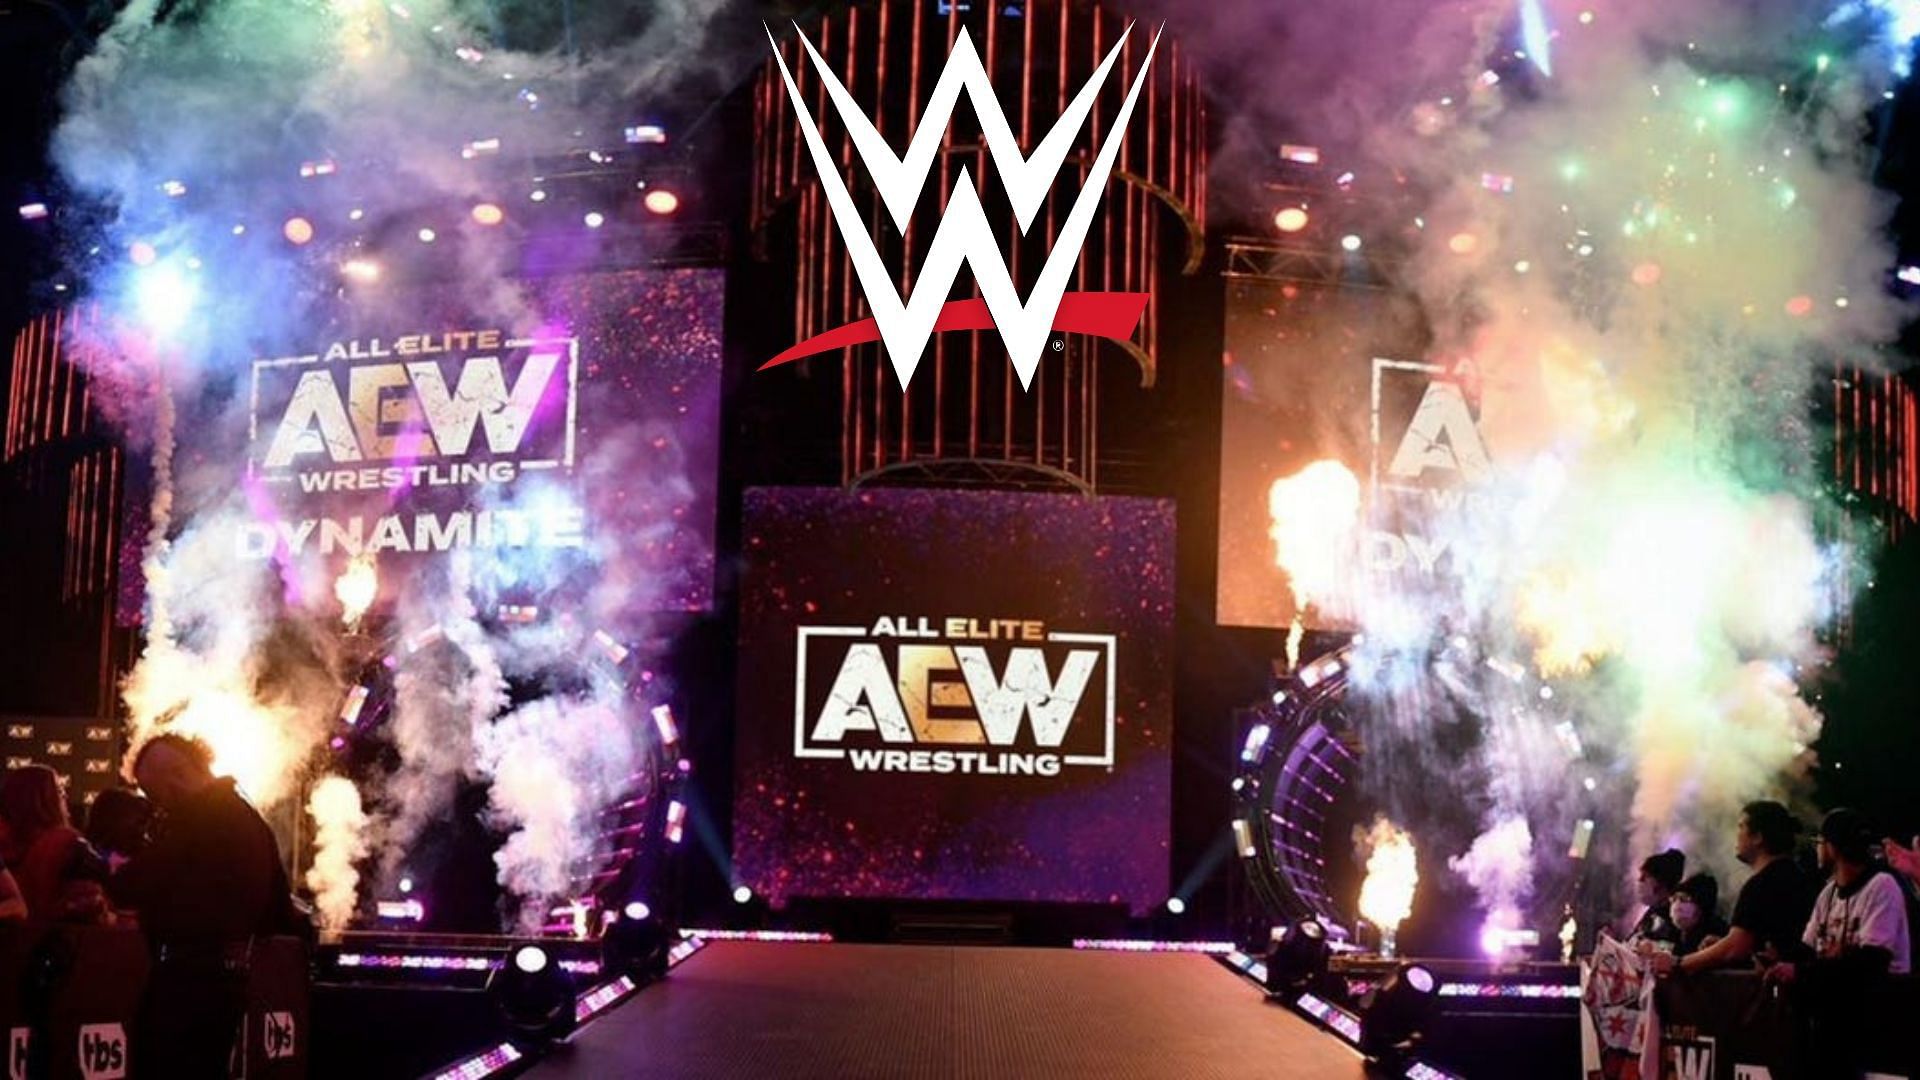 Which former WWE Superstar could be appearing on AEW Dynamite?